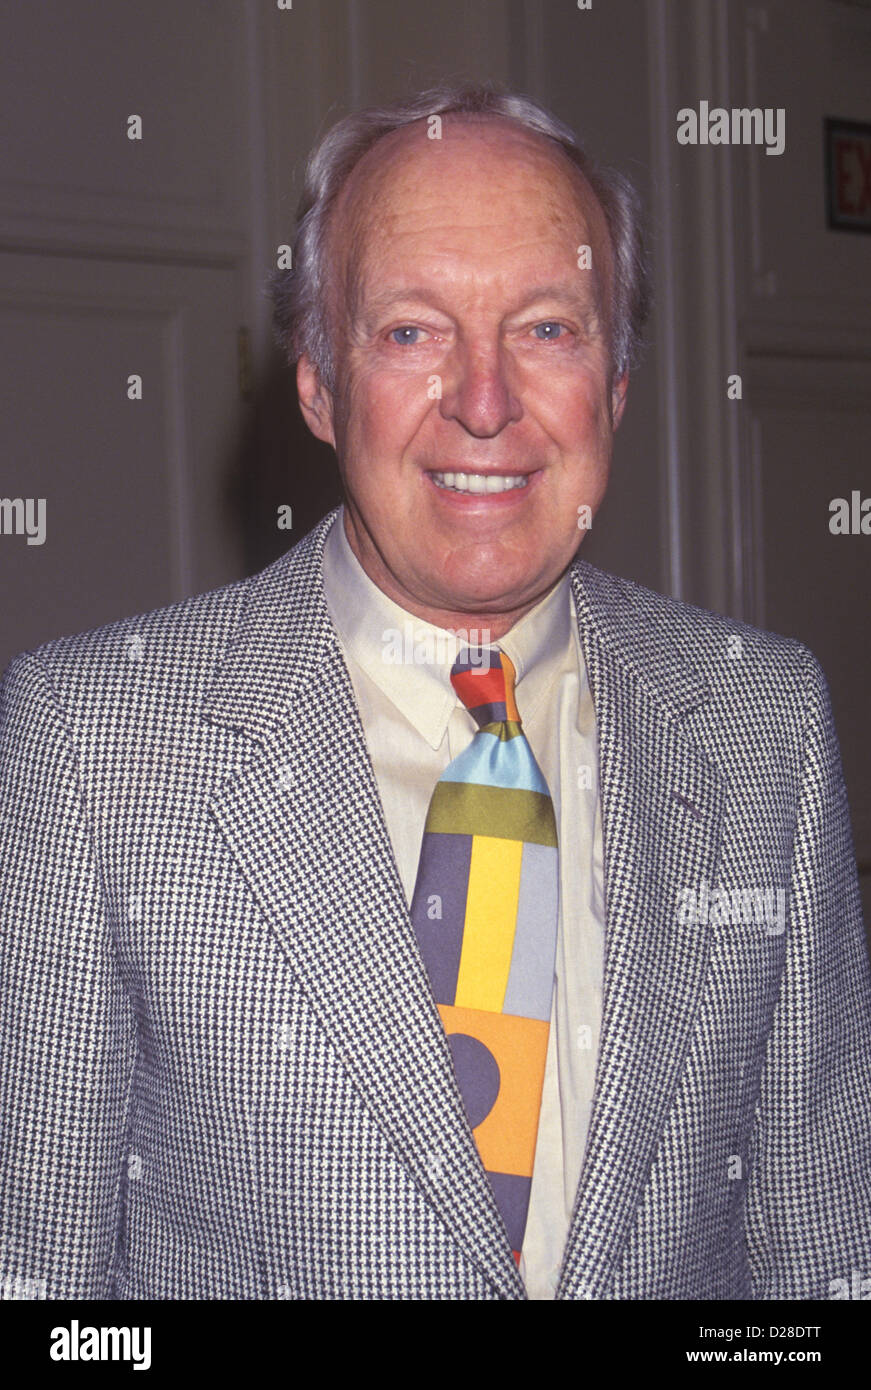 Jan. 16, 2013 - Livermore, California, U.S. - Conrad Bain, the Canadian-born actor  who played father figure Phillip Drummond on 'Diff'rent Strokes' has died of natural causes. Bain is known for playing the white adoptive father of two African-American brothers on the hit 'Diff'rent Strokes' that turned Gary Coleman into a TV star. PICTURED: April 20, 1994 - Los Angeles, California, U.S. - CONRAD BAIN at the SAG Foundation Award in honor of John Cleese. (Credit Image: Credit:  Kathy Hutchins/ZUMAPRESS.com/ Alamy live news) Stock Photo